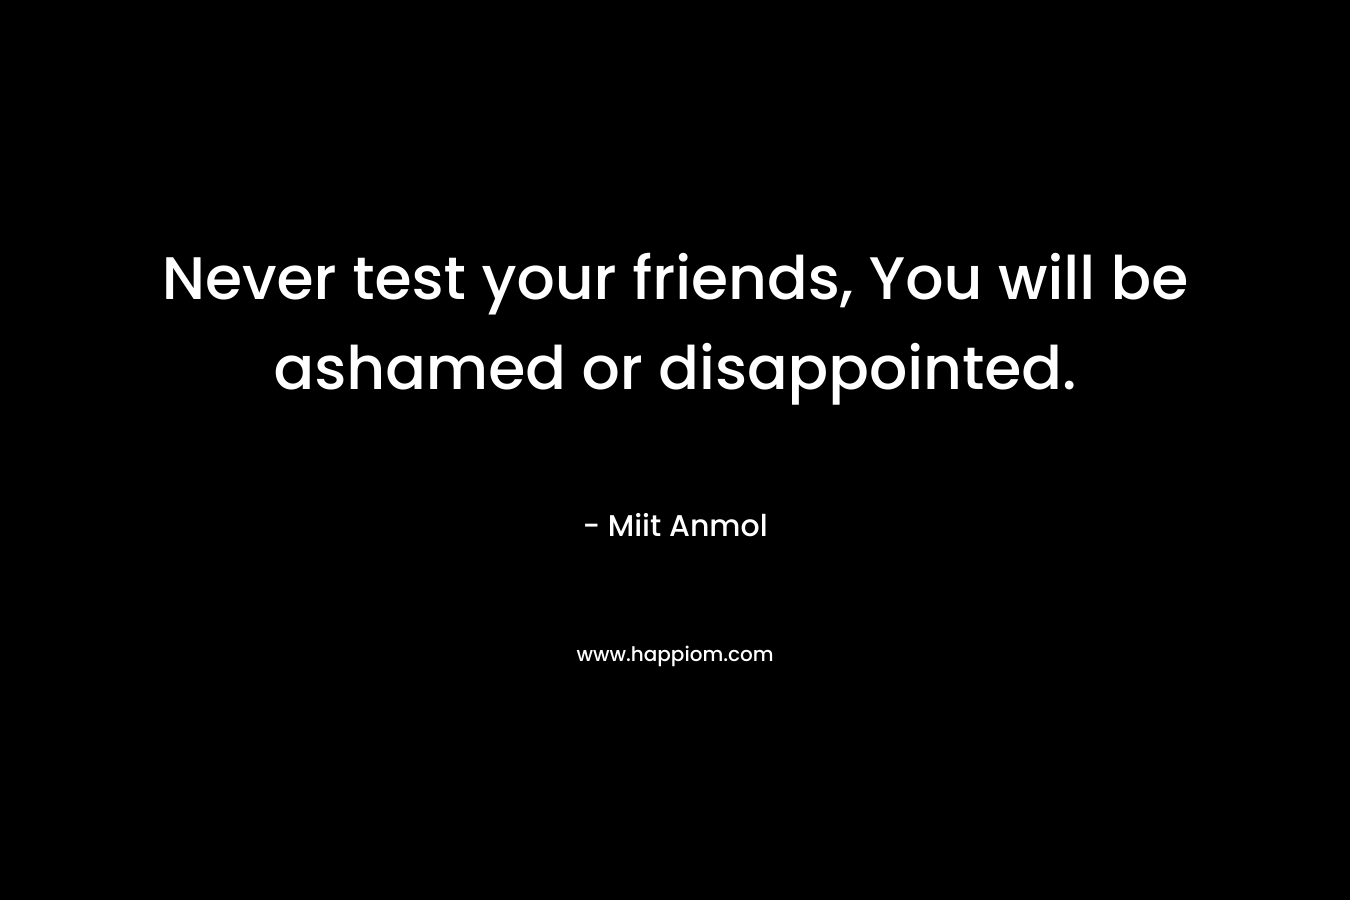 Never test your friends, You will be ashamed or disappointed.